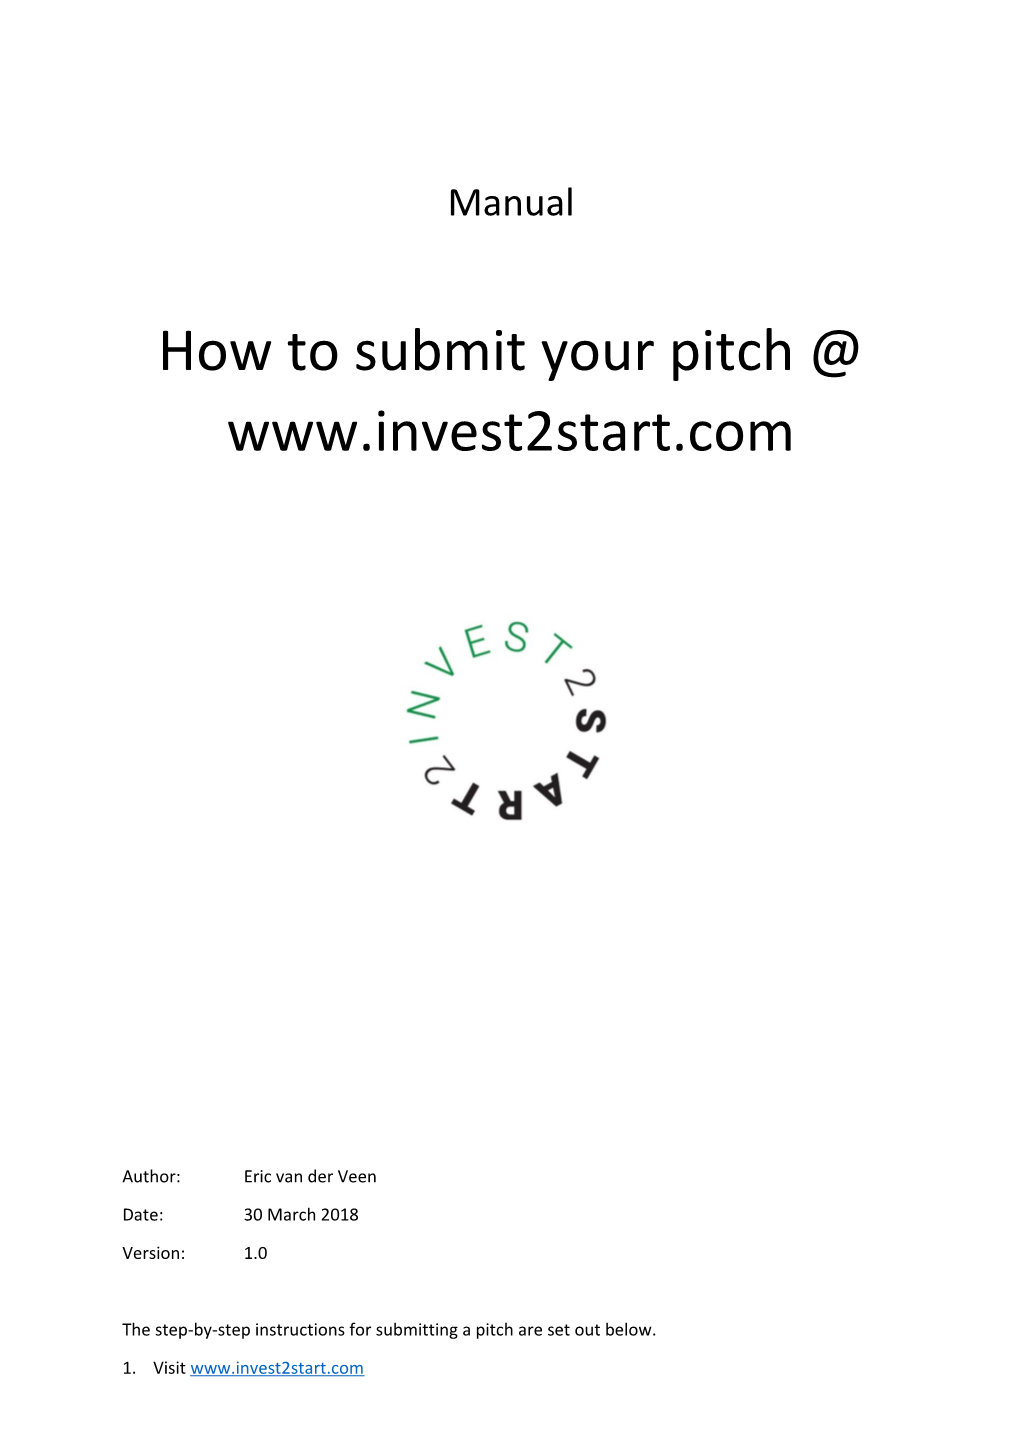 How to Submit Your Pitch